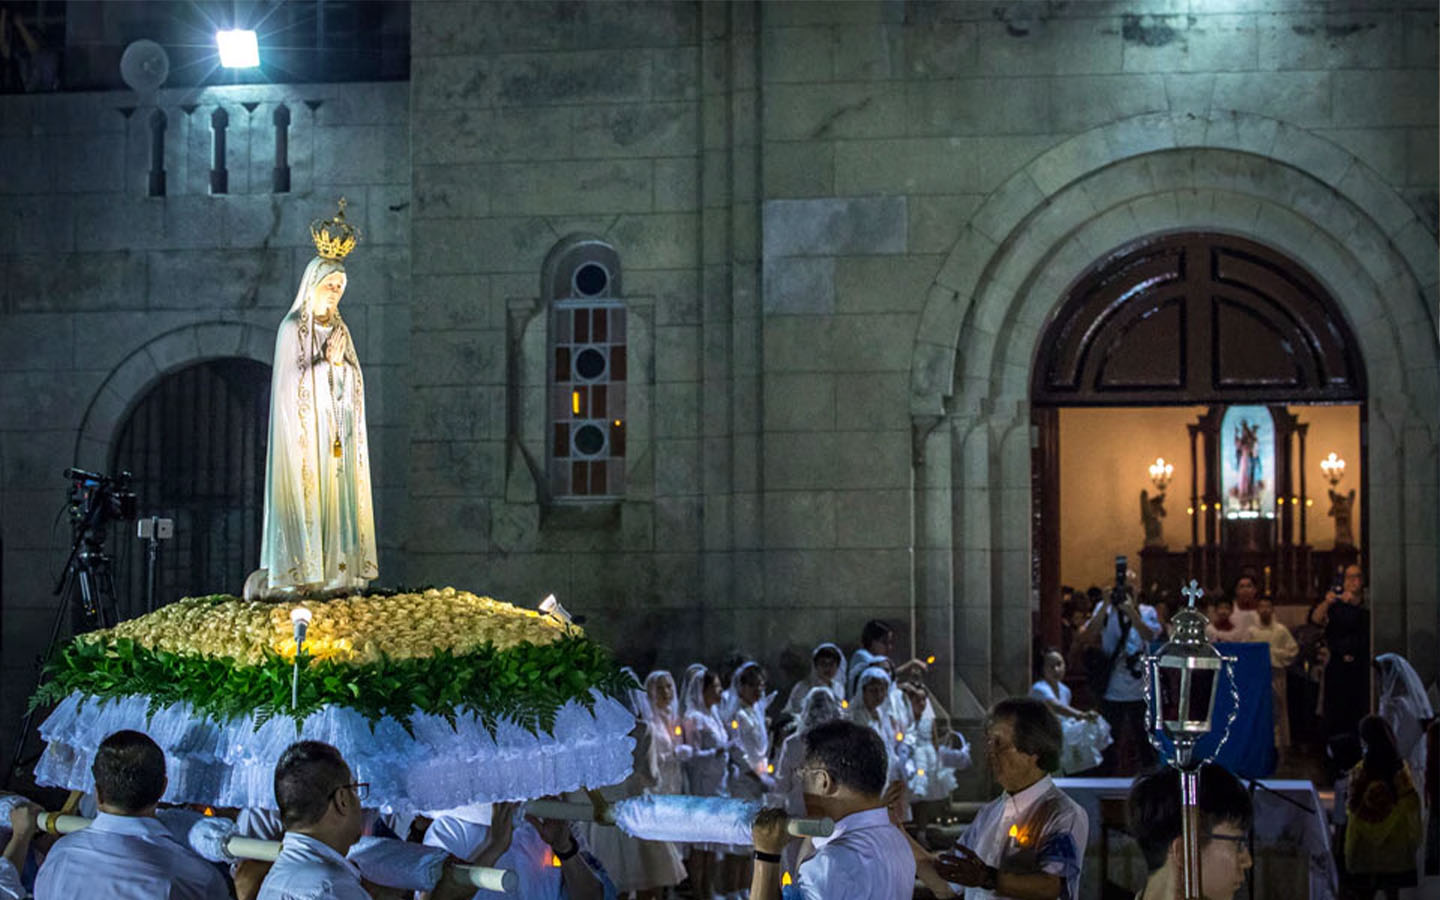 The Fátima procession draws huge crowds to the streets of Macao